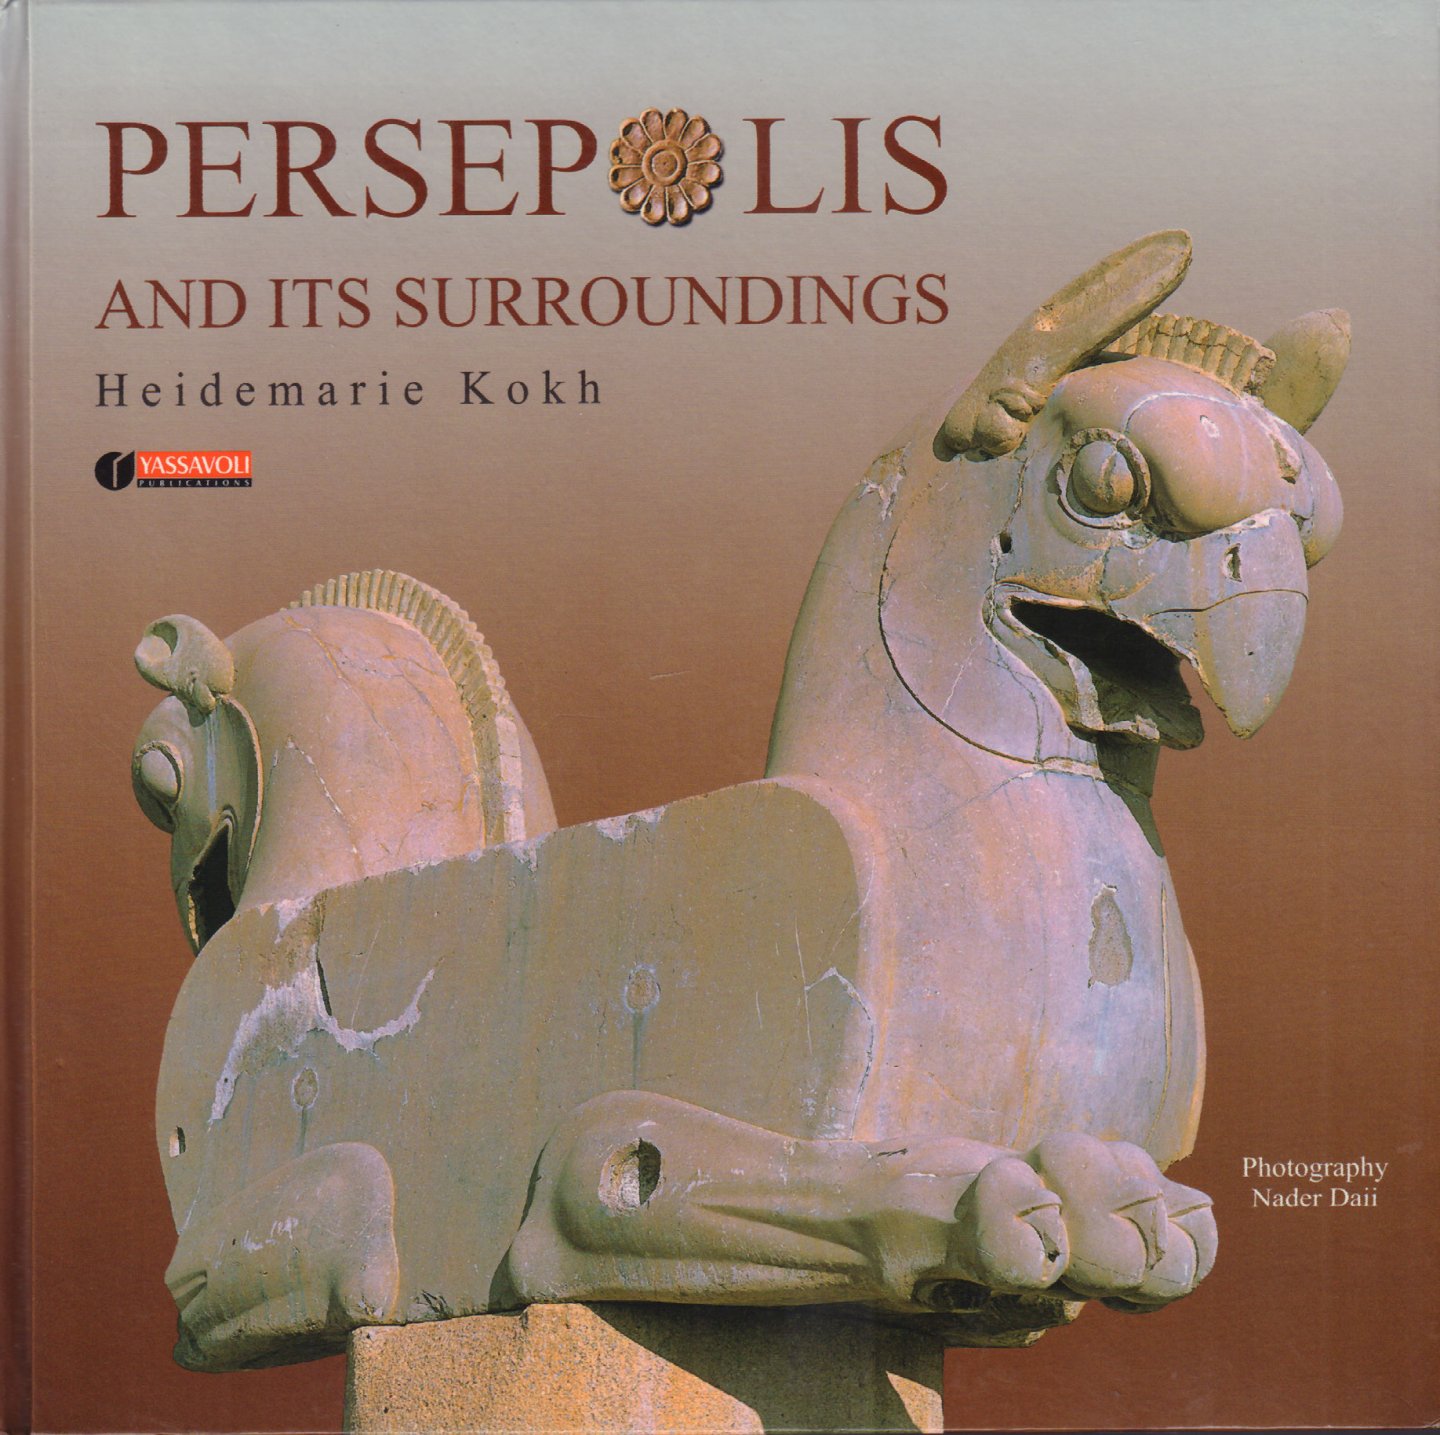 Kokh, Heidemarie & Nader Daii (photography) - Persepolis and Its Surroundings, 195 pag. hardcover, gave staat